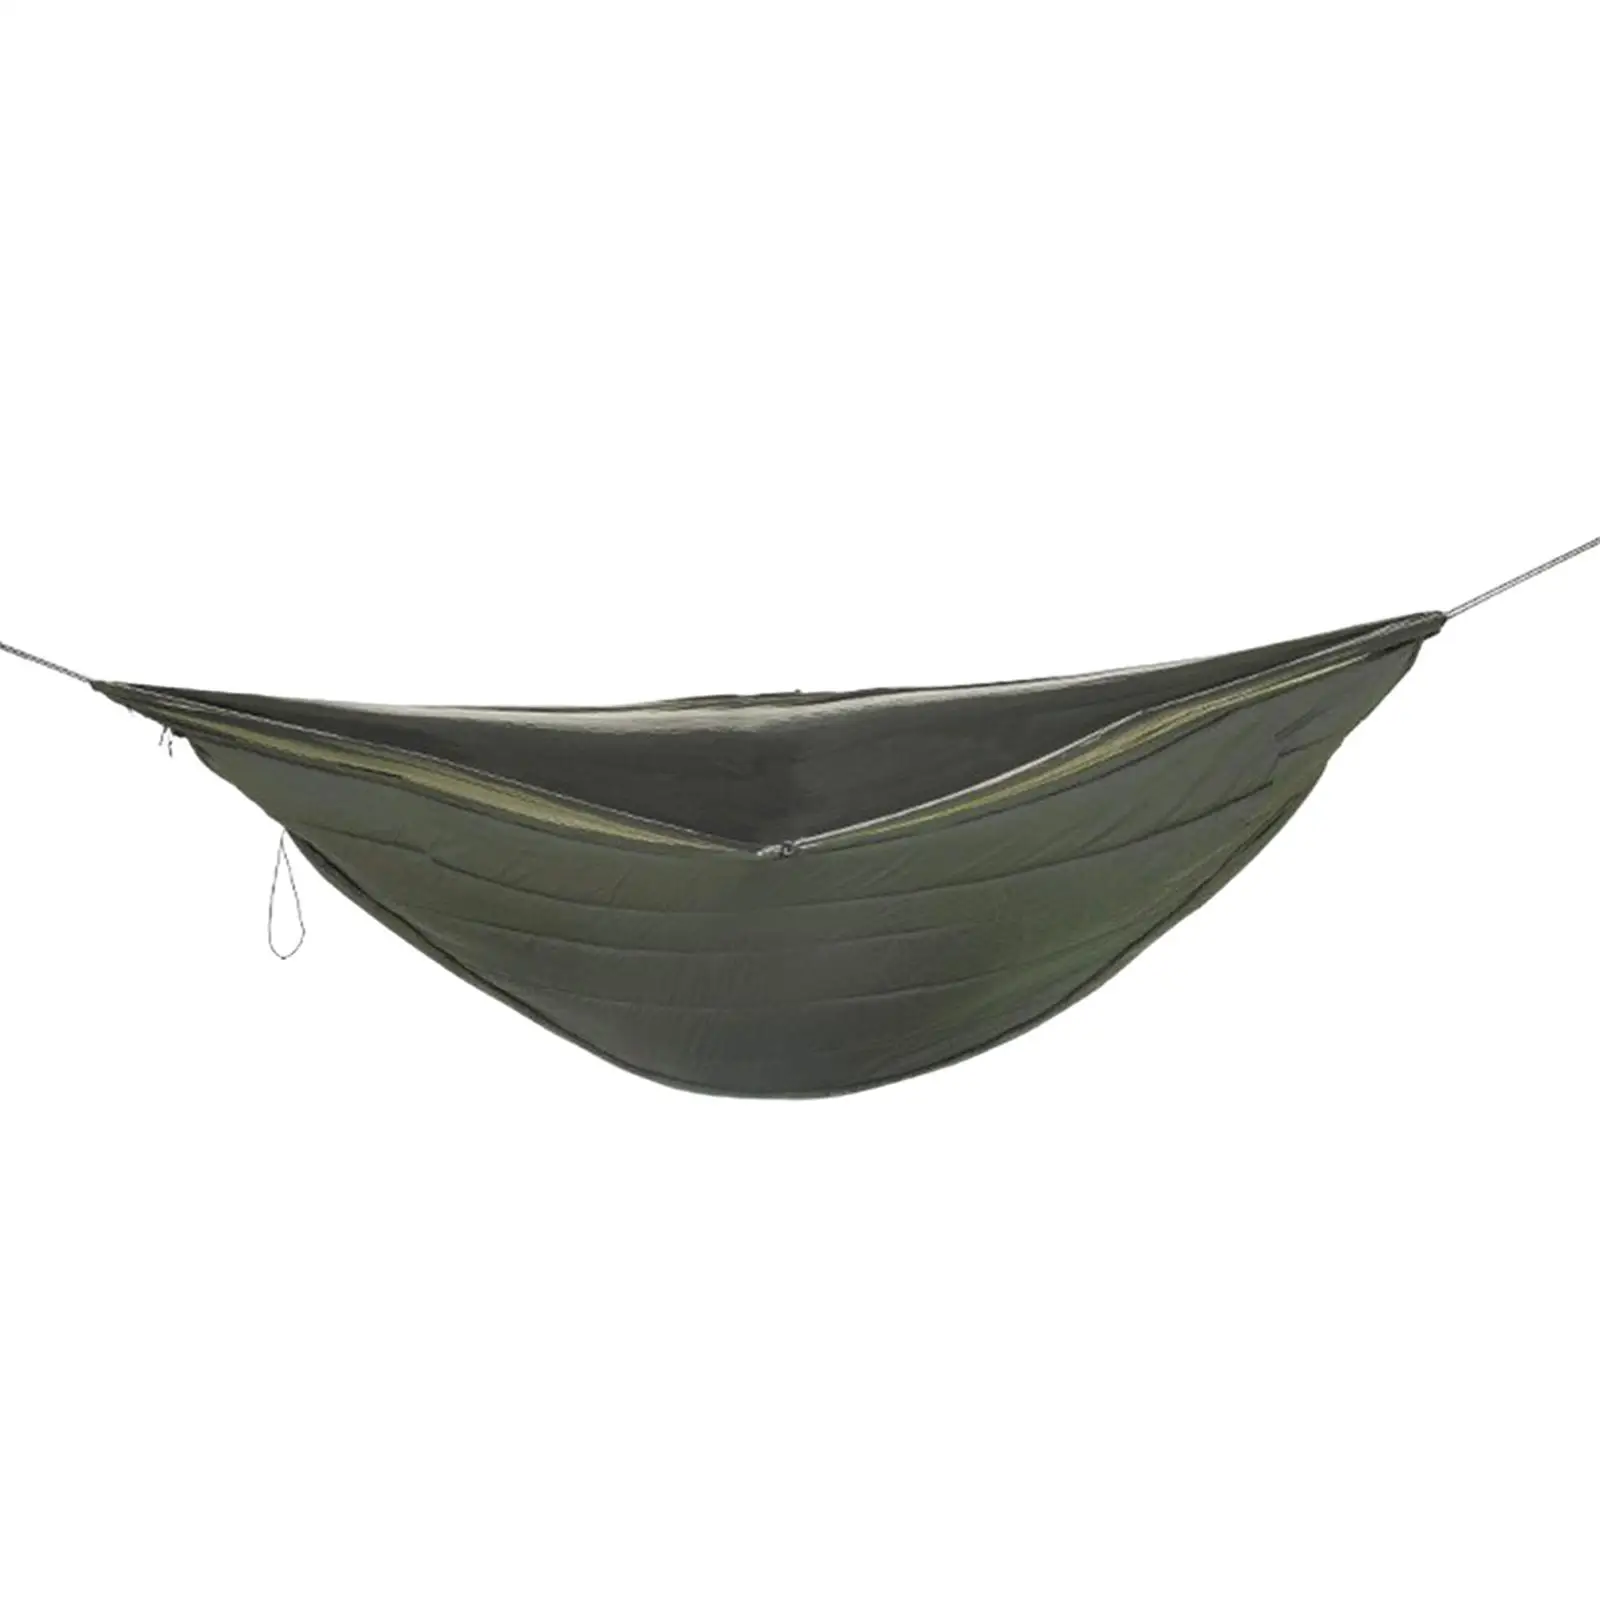 Hammock Underquilt Lightweight Warm Insulated Full Length for Outdoor Travel